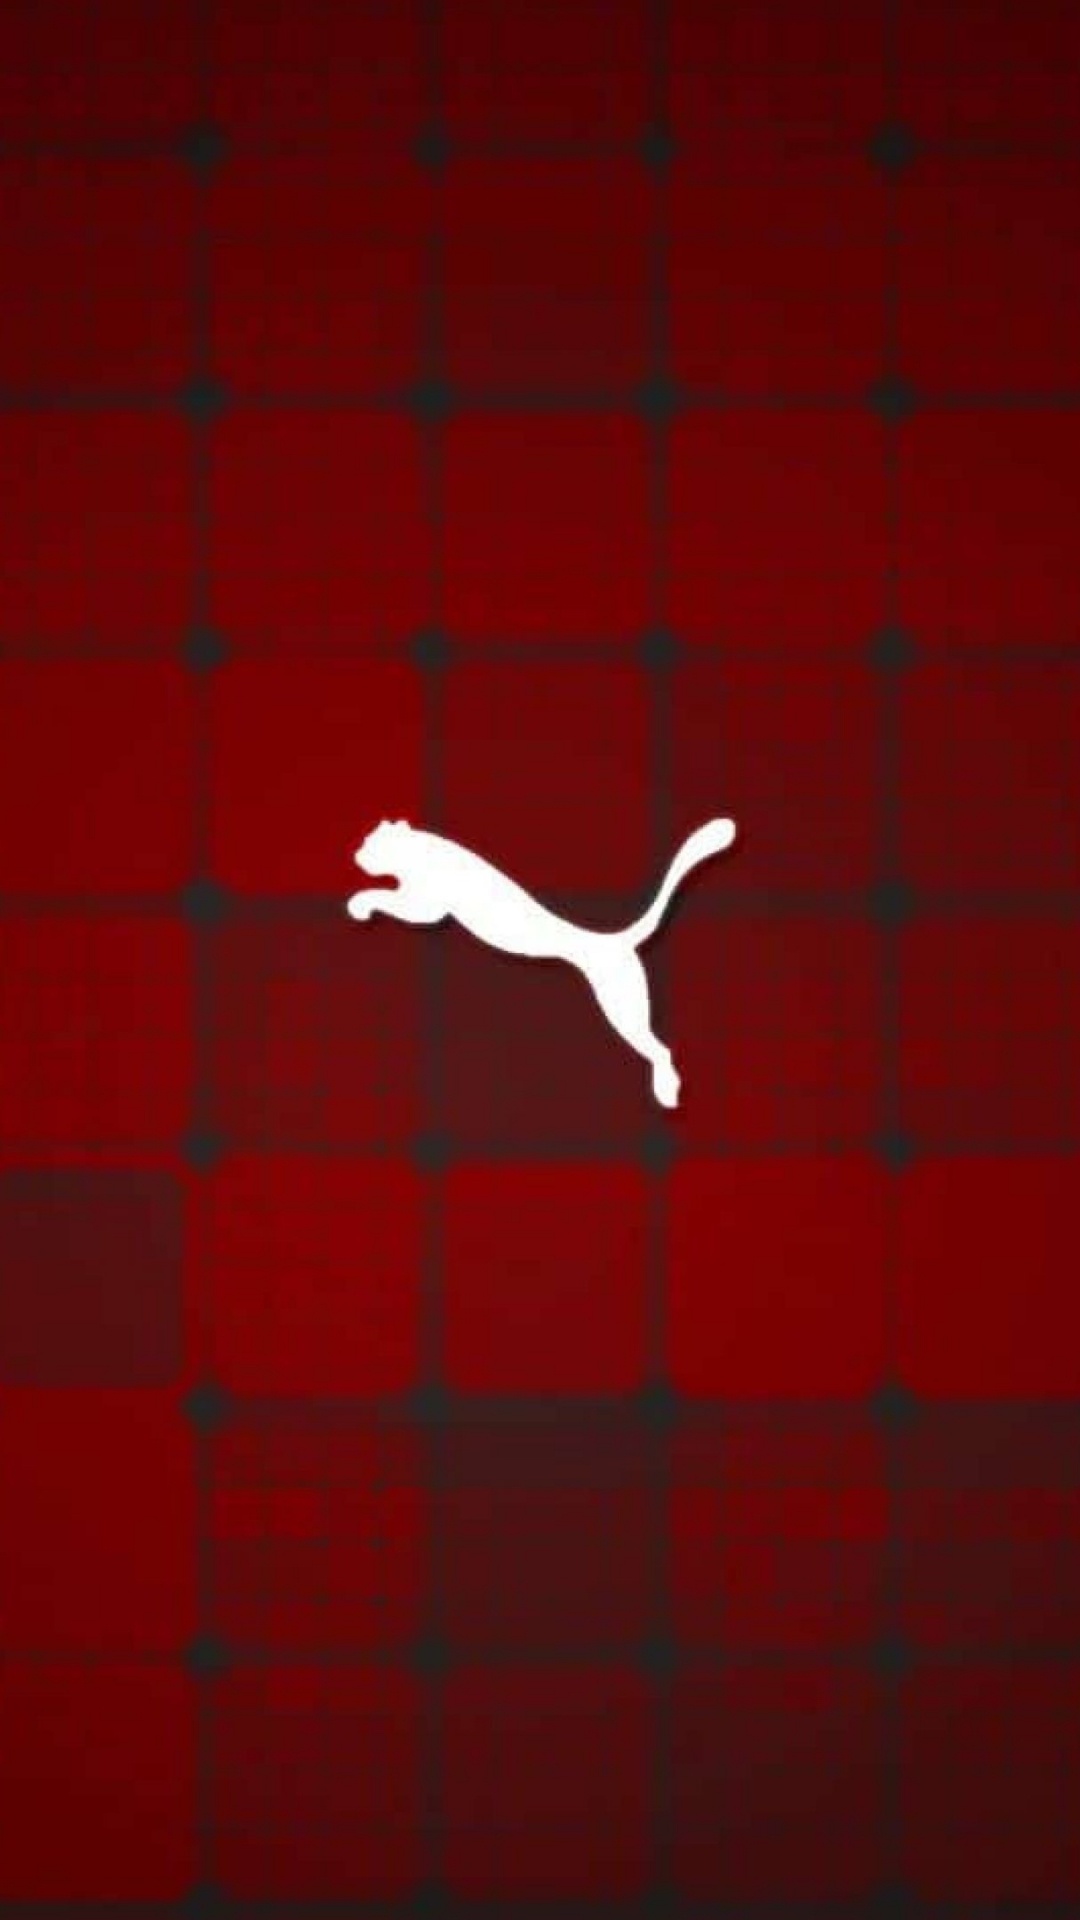 Puma, Red, Graphique, Atmosphère, Ligne. Wallpaper in 1080x1920 Resolution